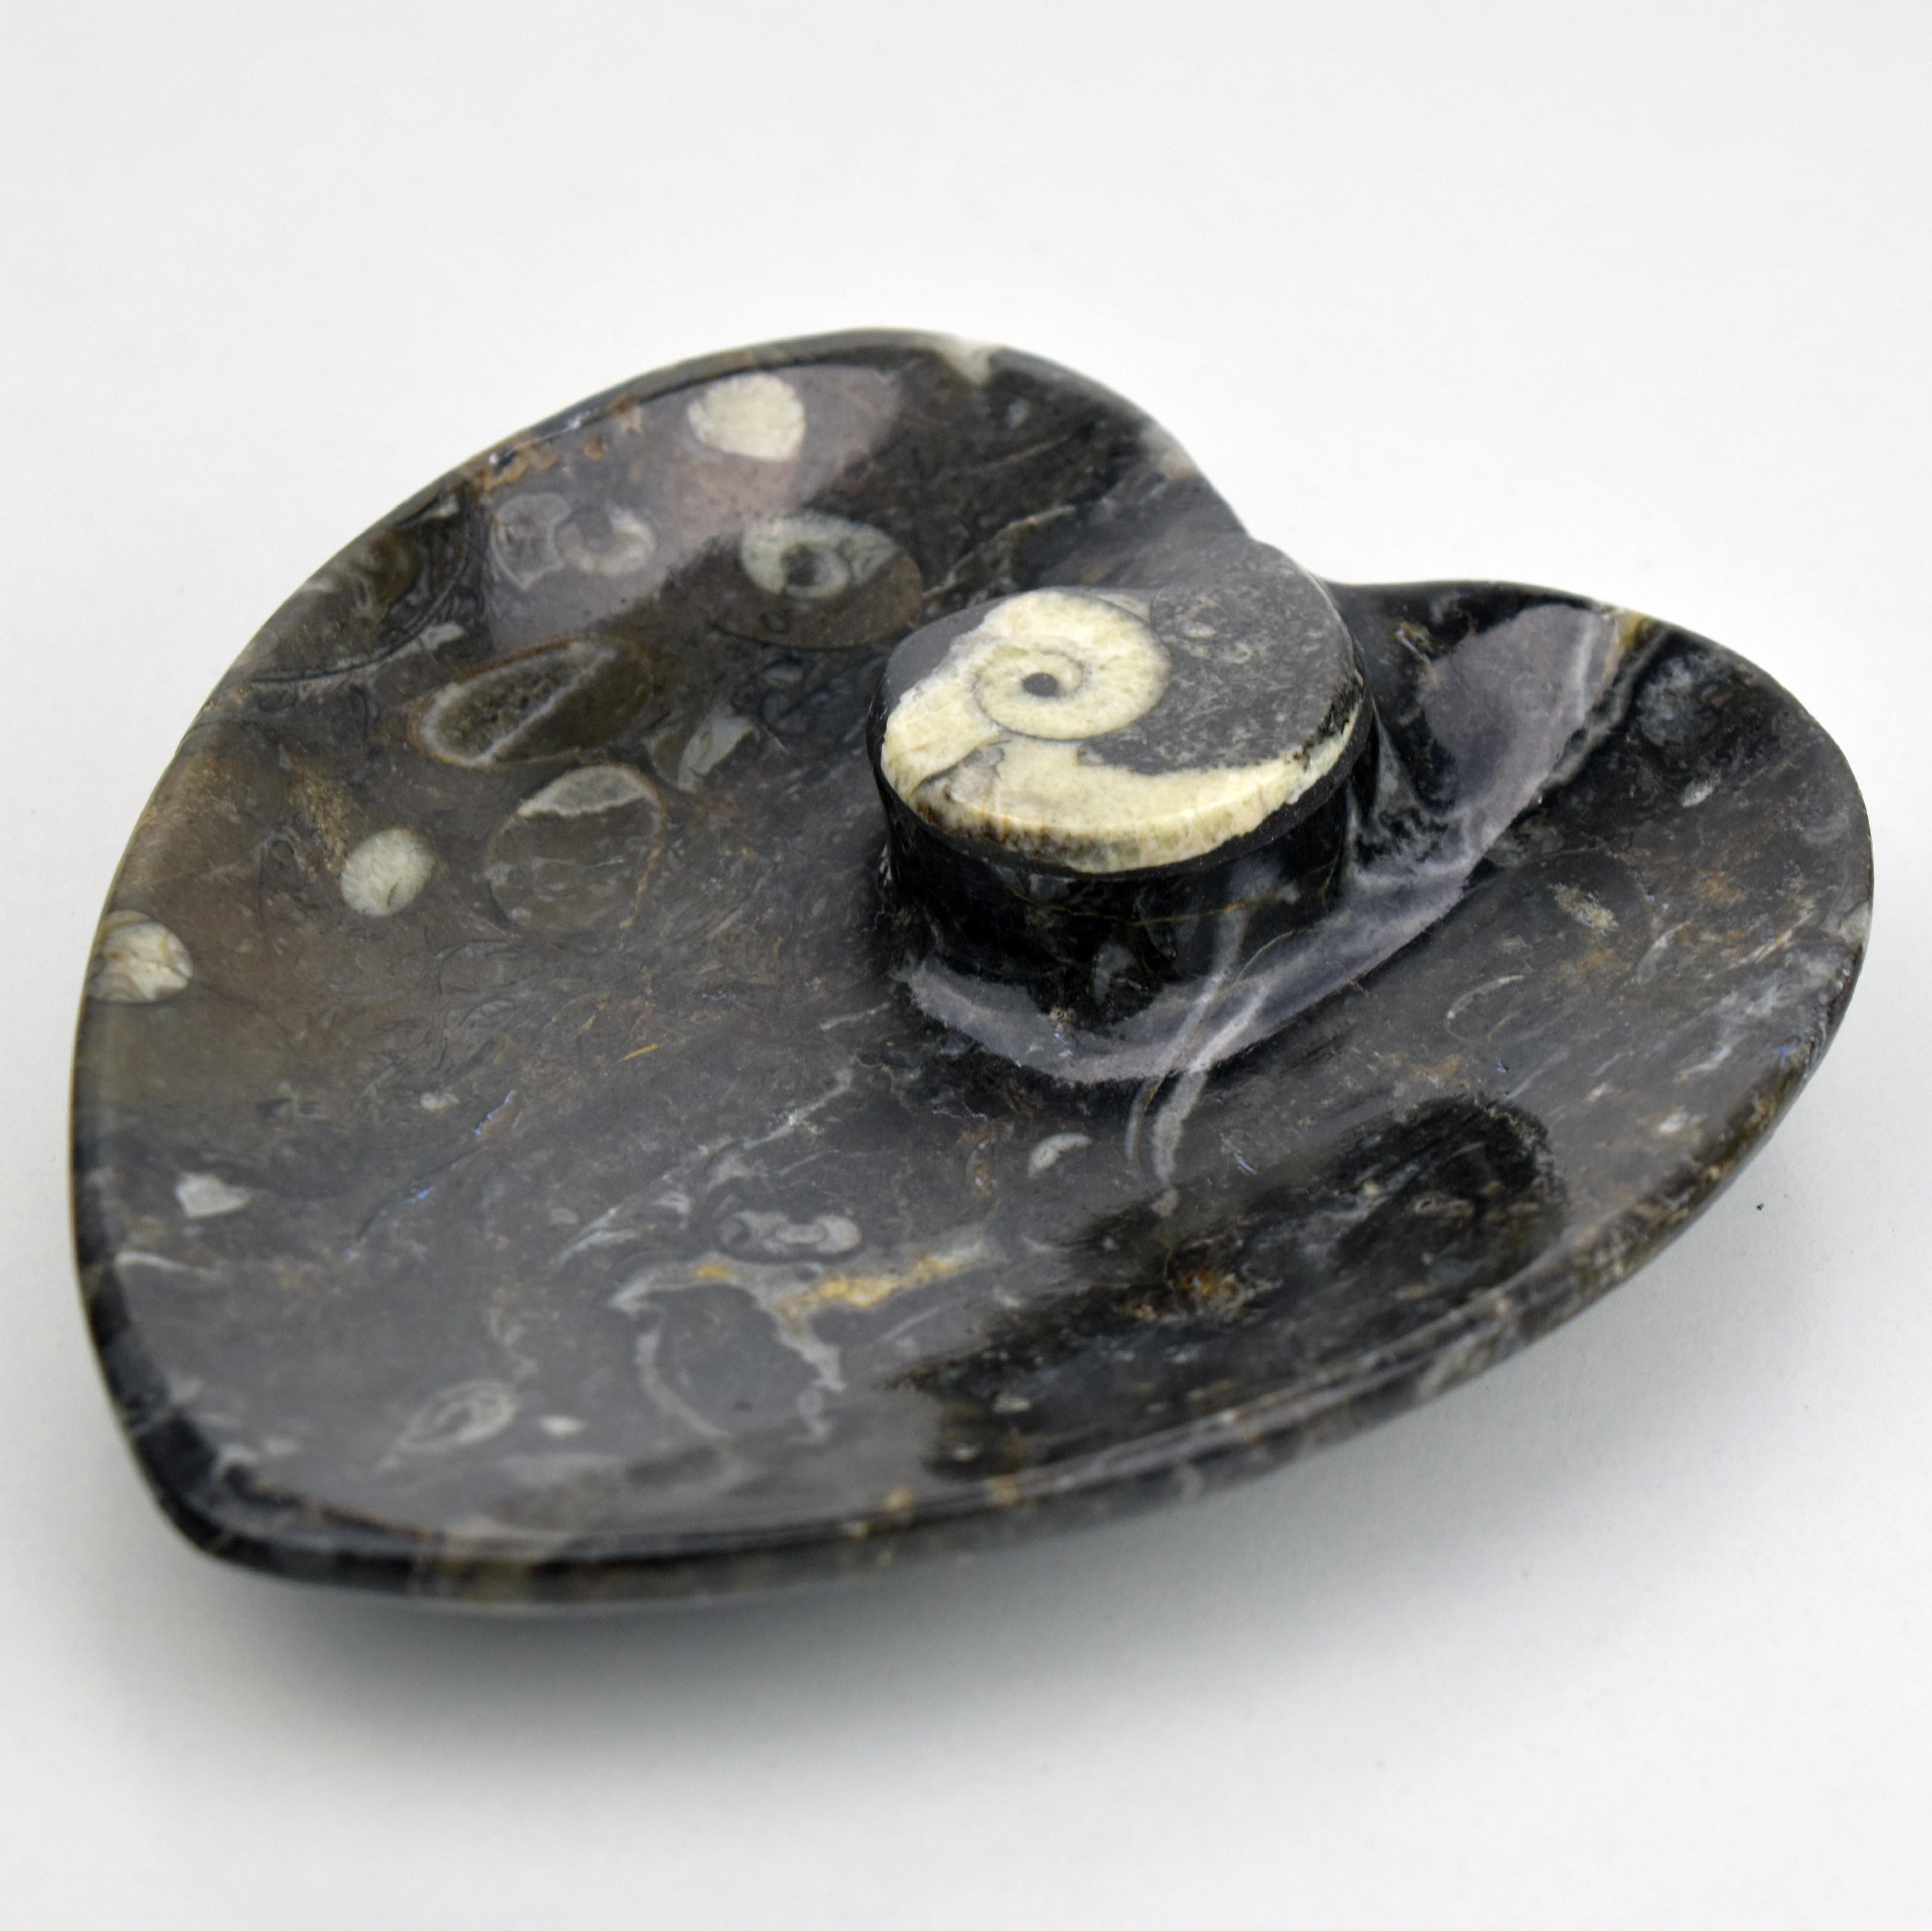 A lovely heart shaped, finely carved and polished vide poche with a centered ammonite and other specimen.